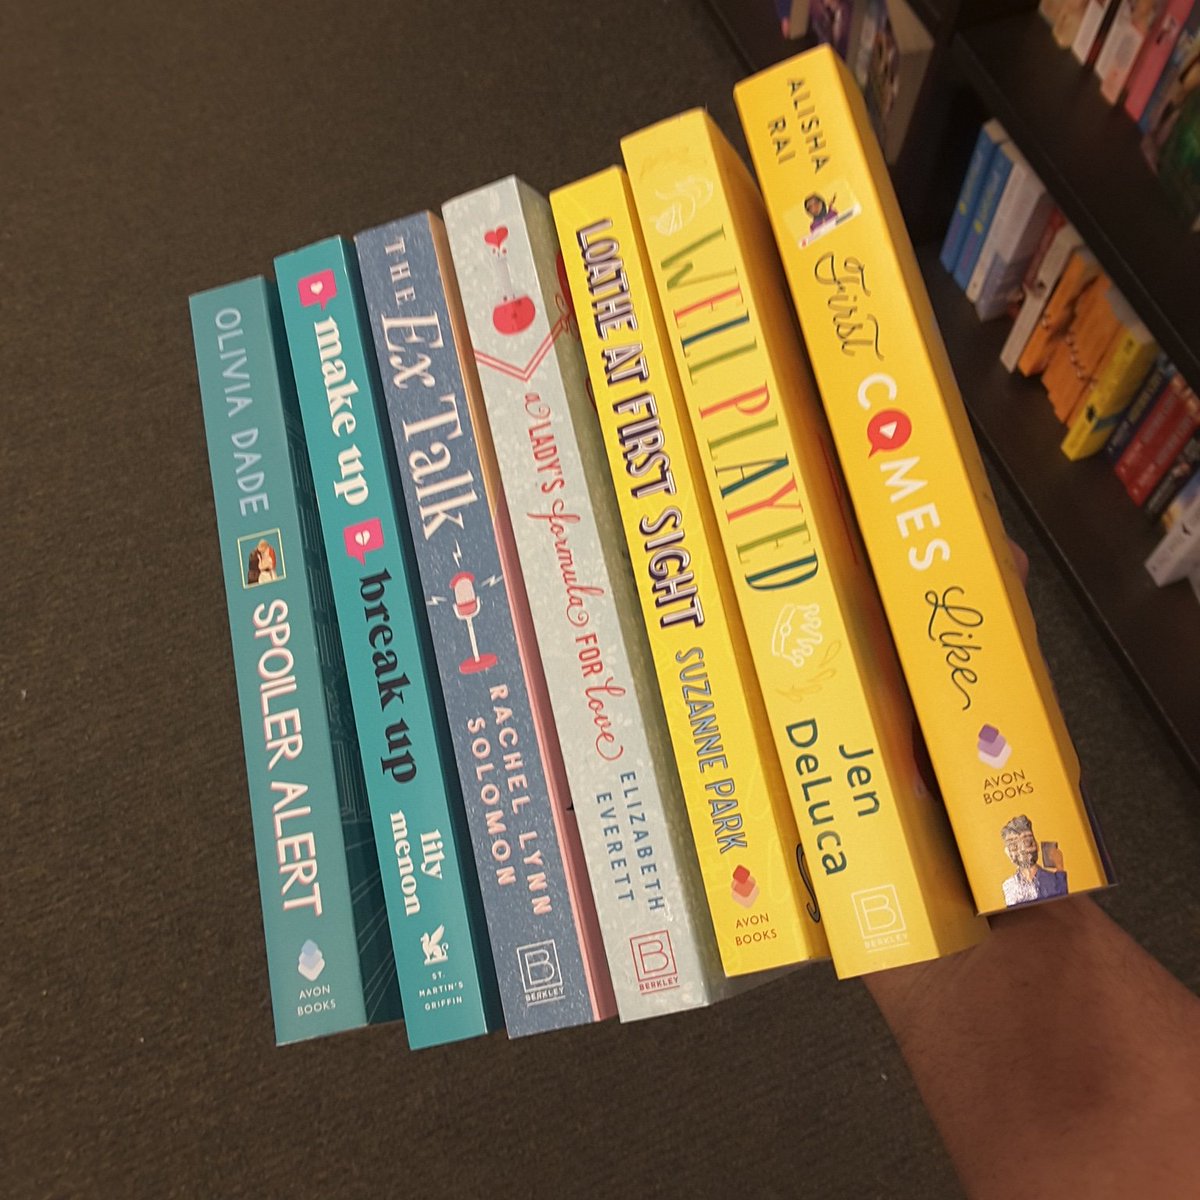 We (and @theLasagna's hands 😂) can barely contain all of our favorite romcom reads lately!!! What's your favorite romcom? 😗😗😗 #bnmyweekendisbooked #bnbestseller #bnbuzz #bestyearyet